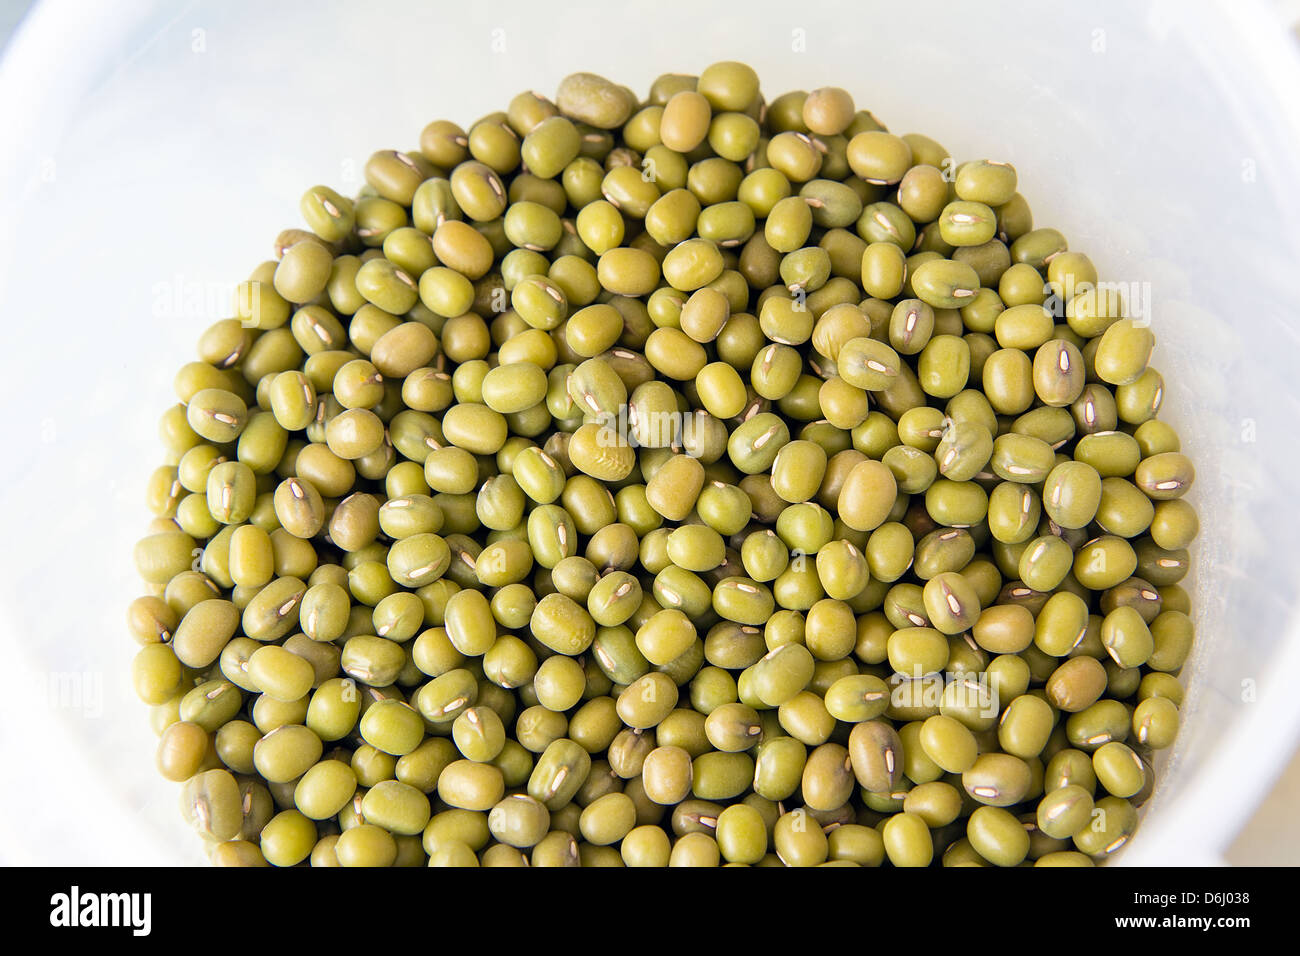 Green Whole Mung Beans in Plastic Container Stock Photo